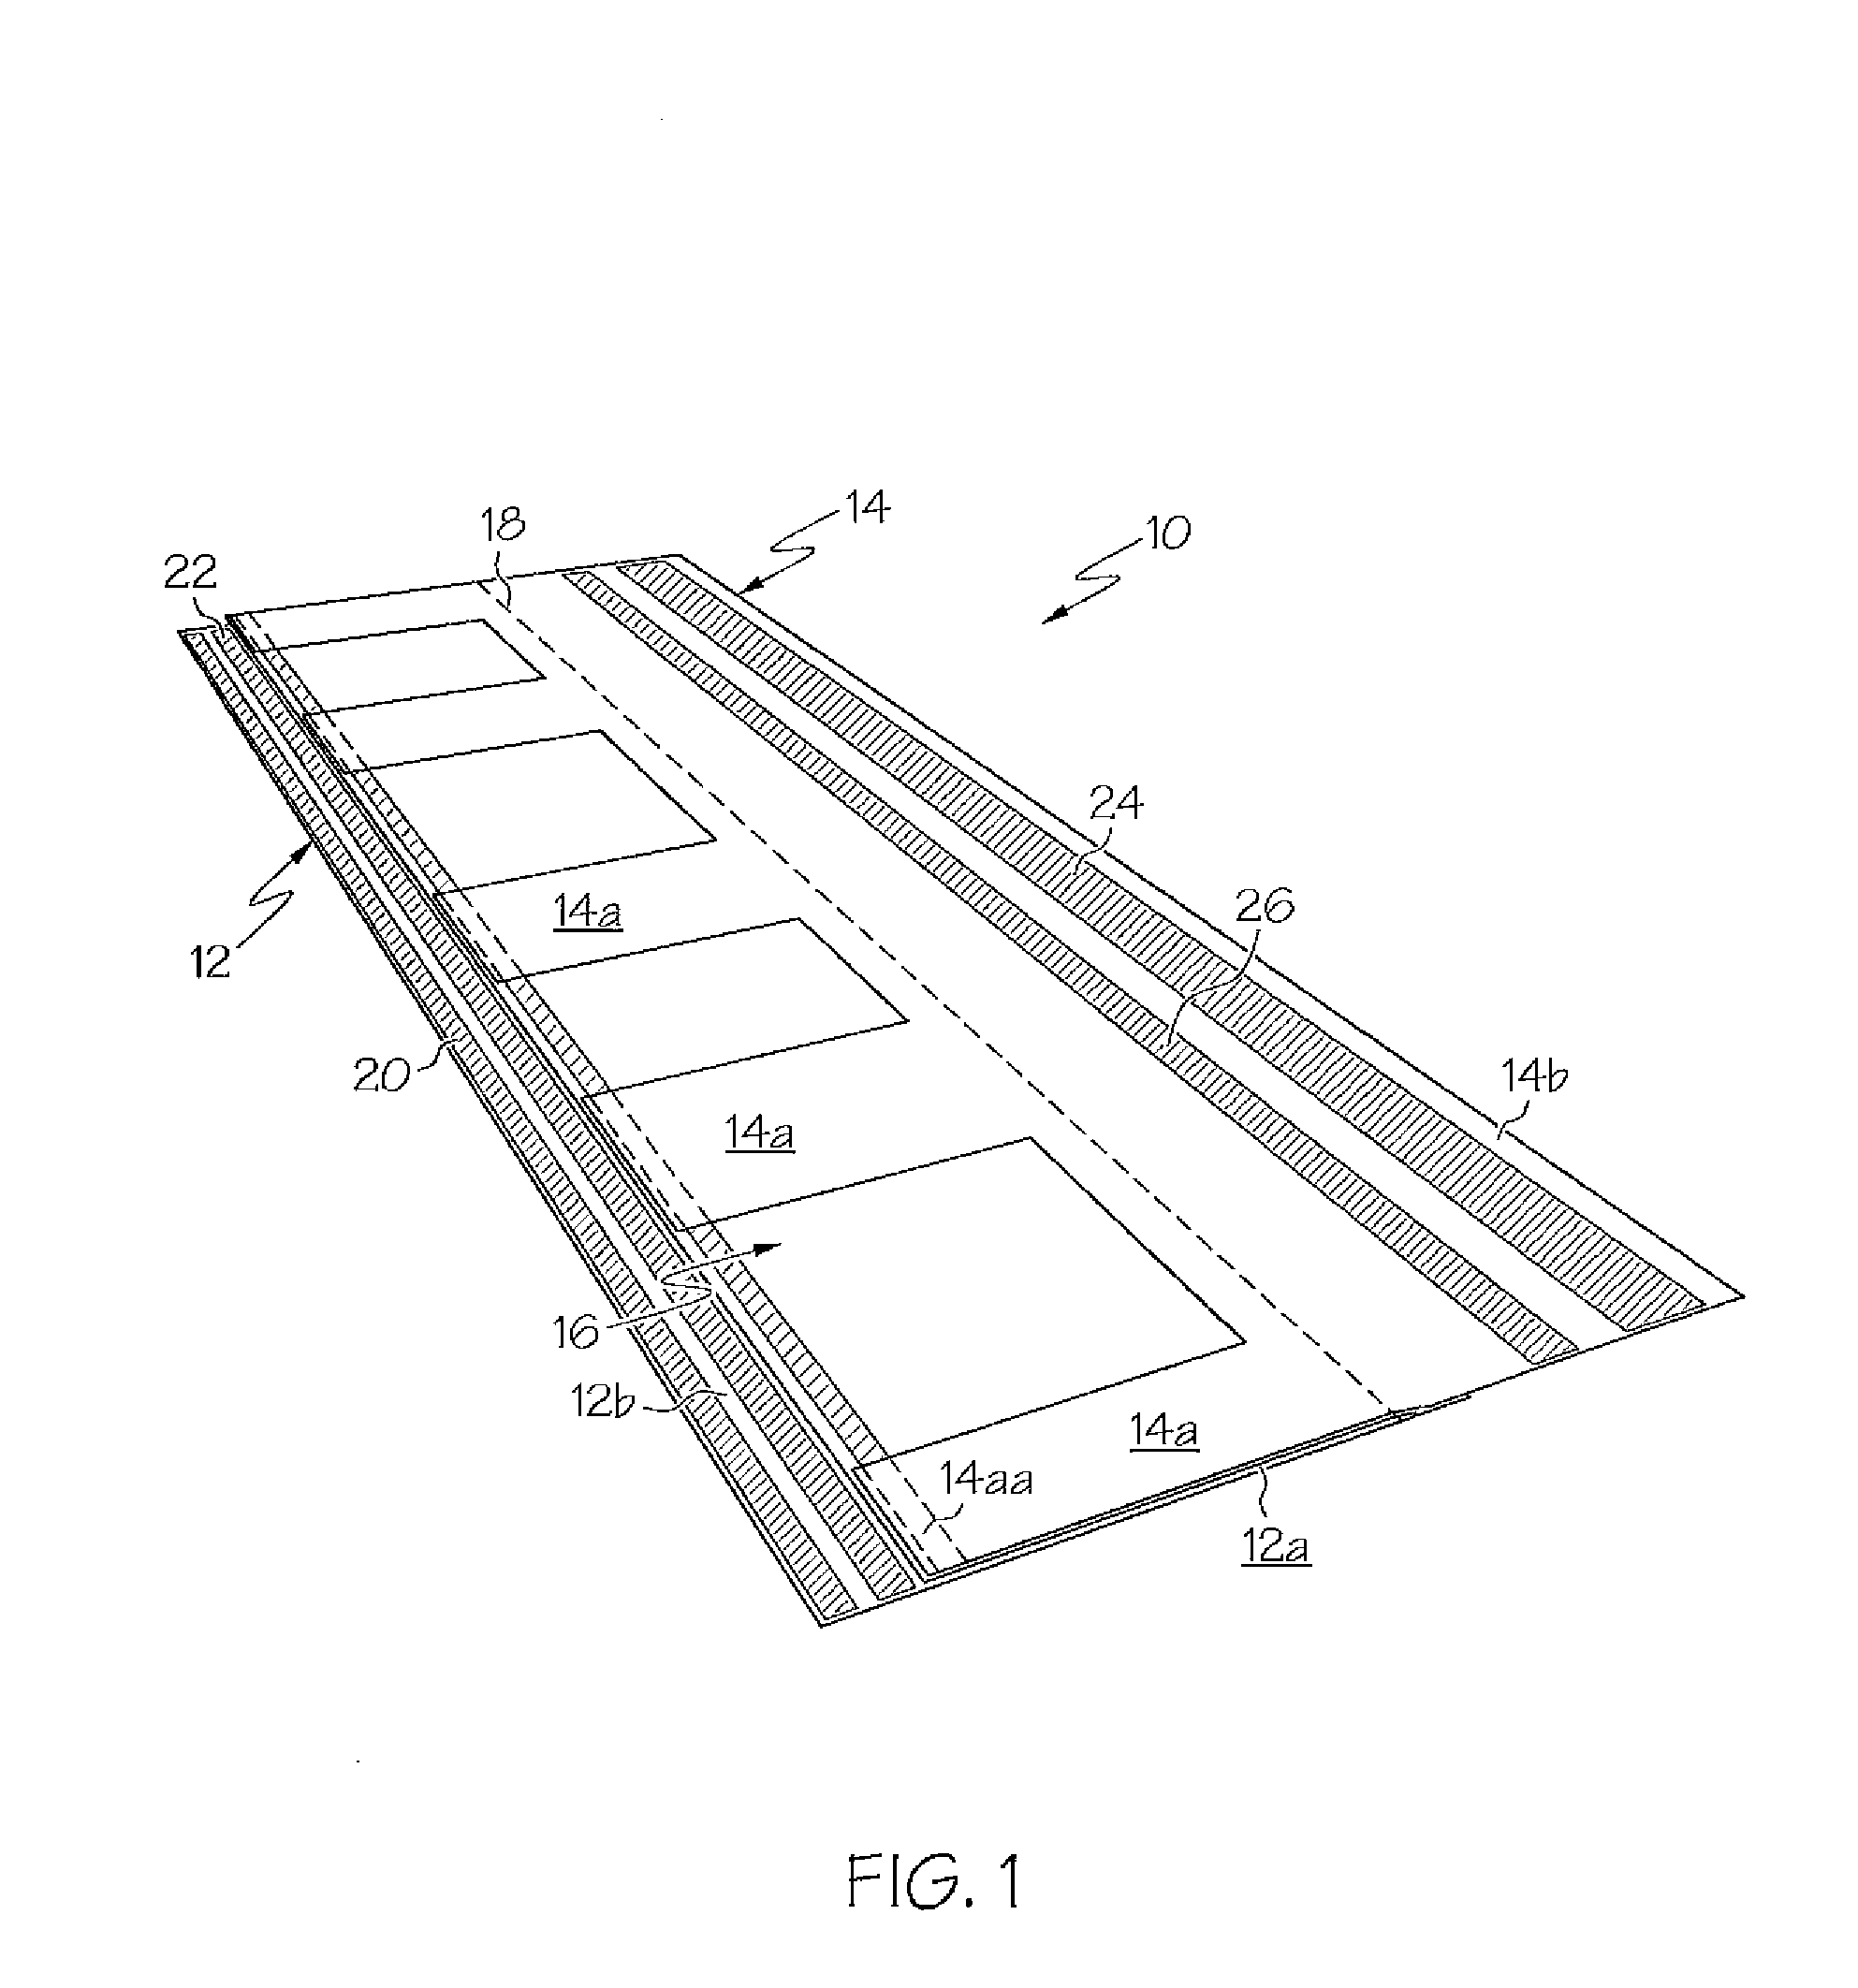 Top down trap lock shingle system for roofs